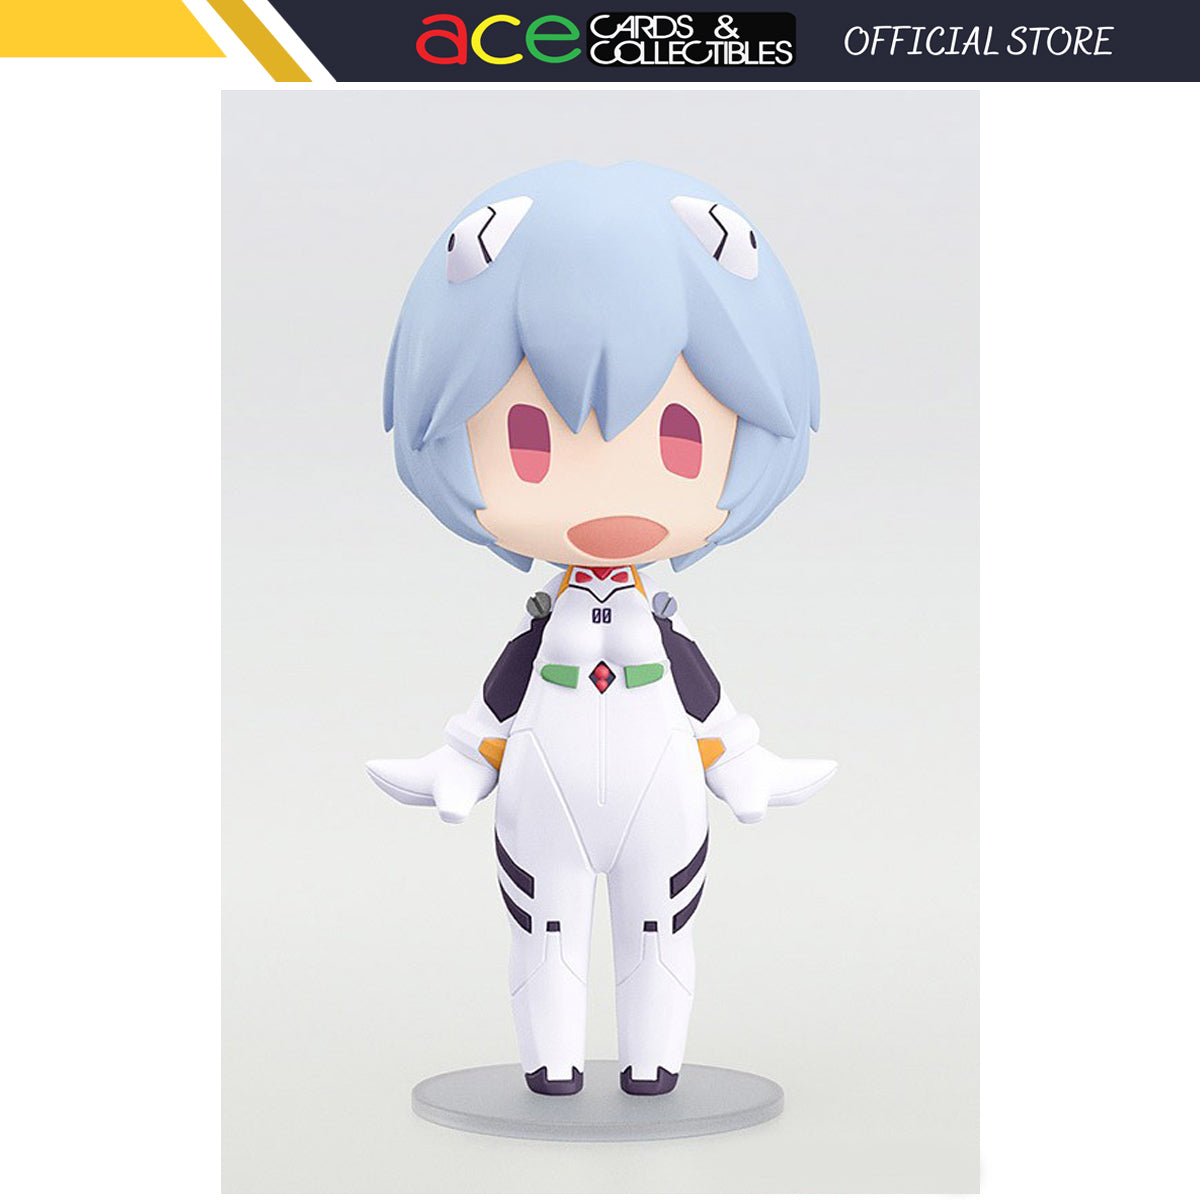 Rebuild of Evangelion ~Hello! Good Smile~ "Rei Ayanami"-Good Smile Company-Ace Cards & Collectibles